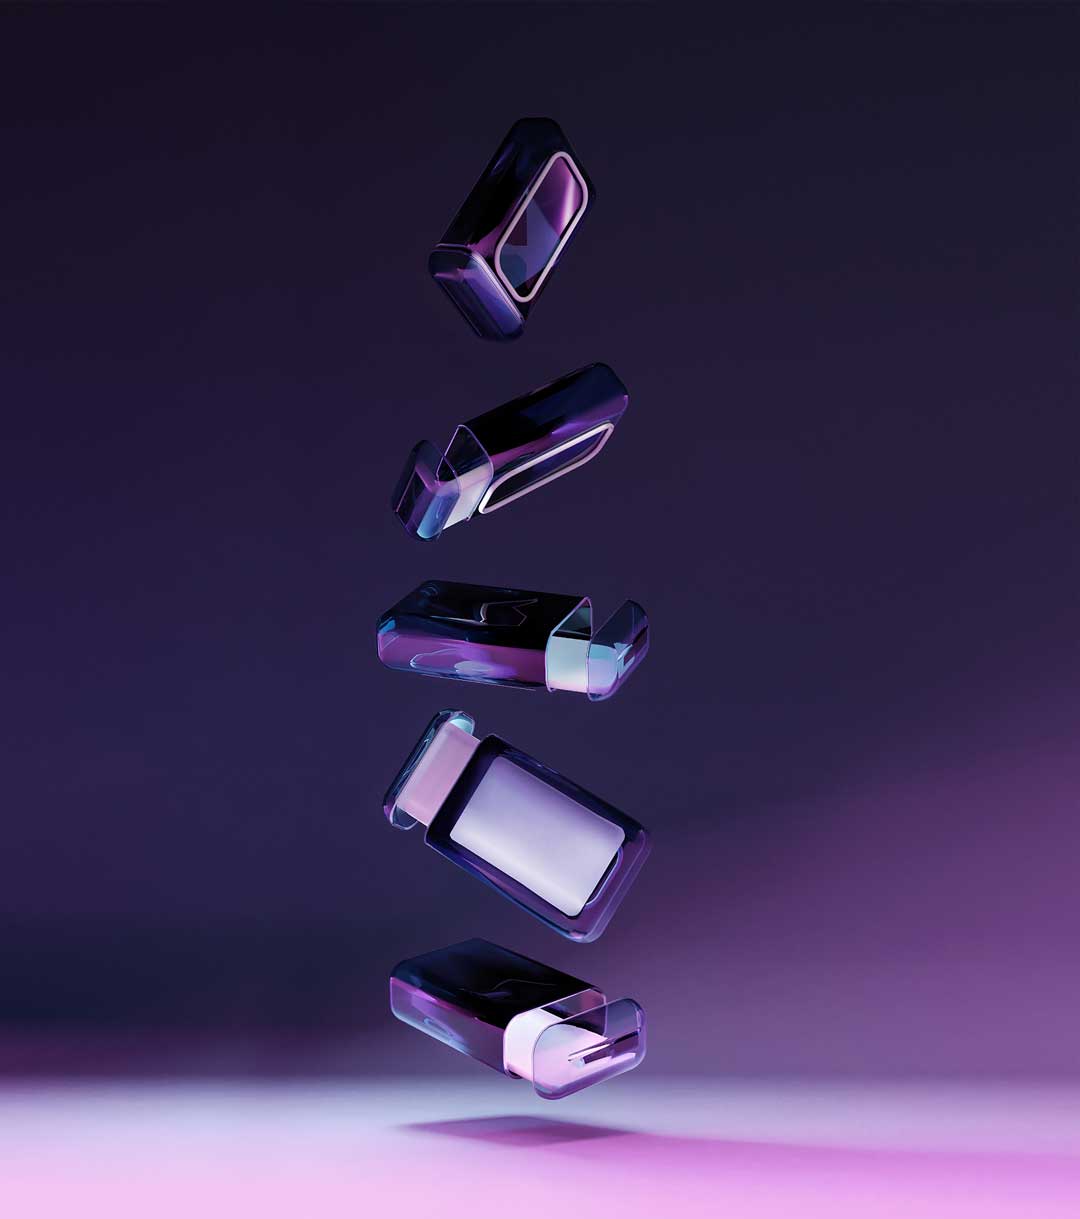 Product visualization presenting a floating piece of plastic furniture, on a purple background.